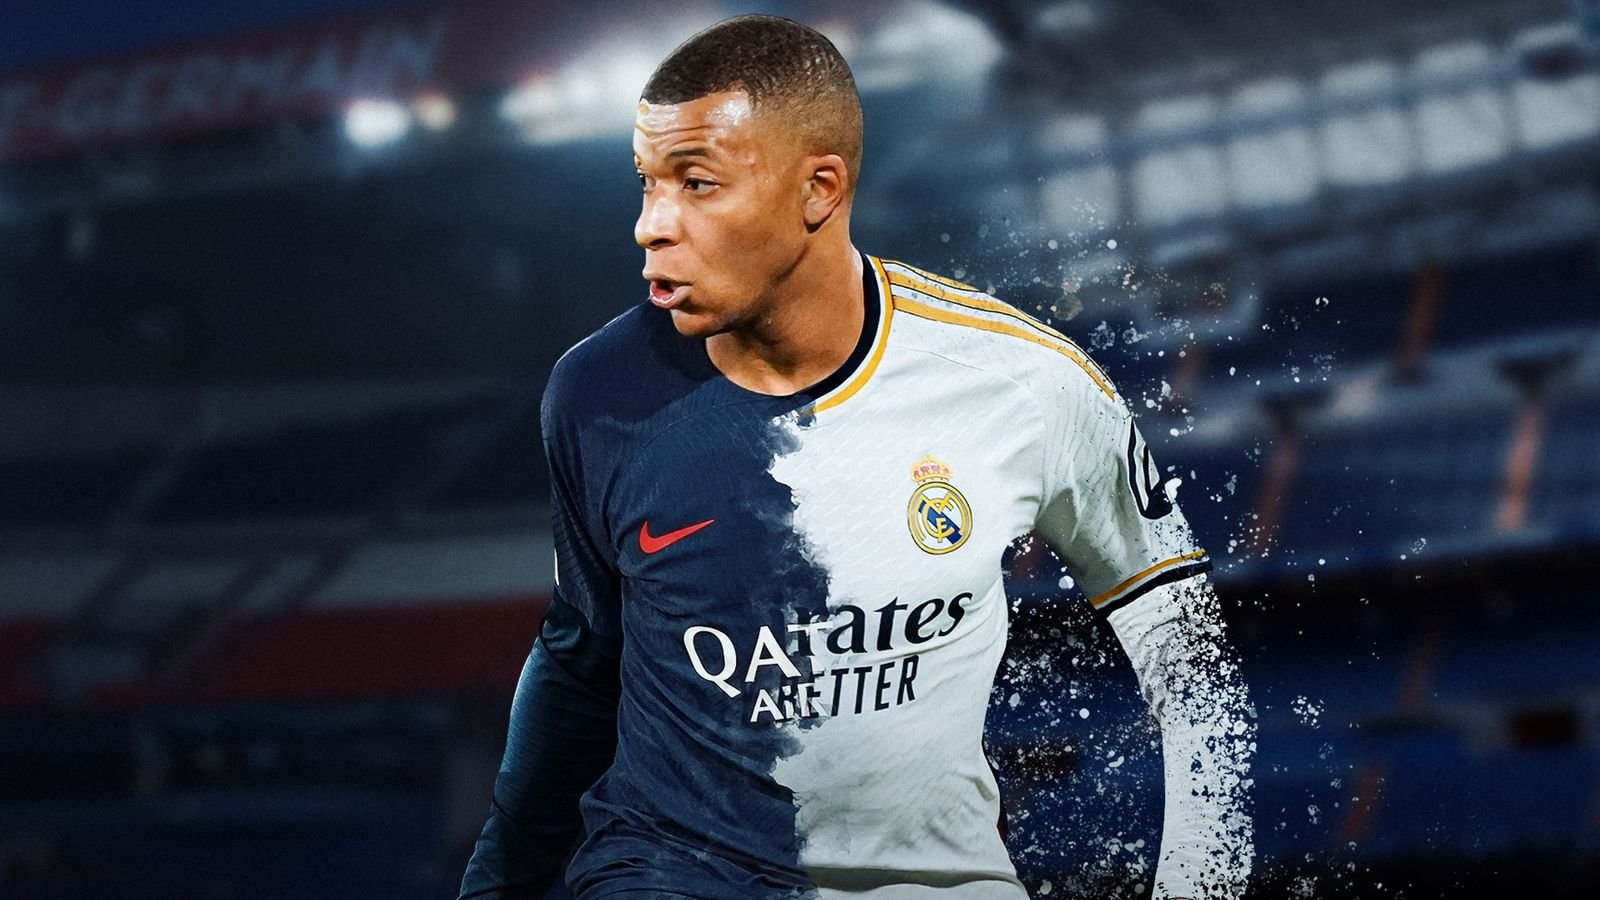 Kylian Mbappe: Real Madrid sign France forward on free transfer after Paris Saint-Germain contract expiry | Football News